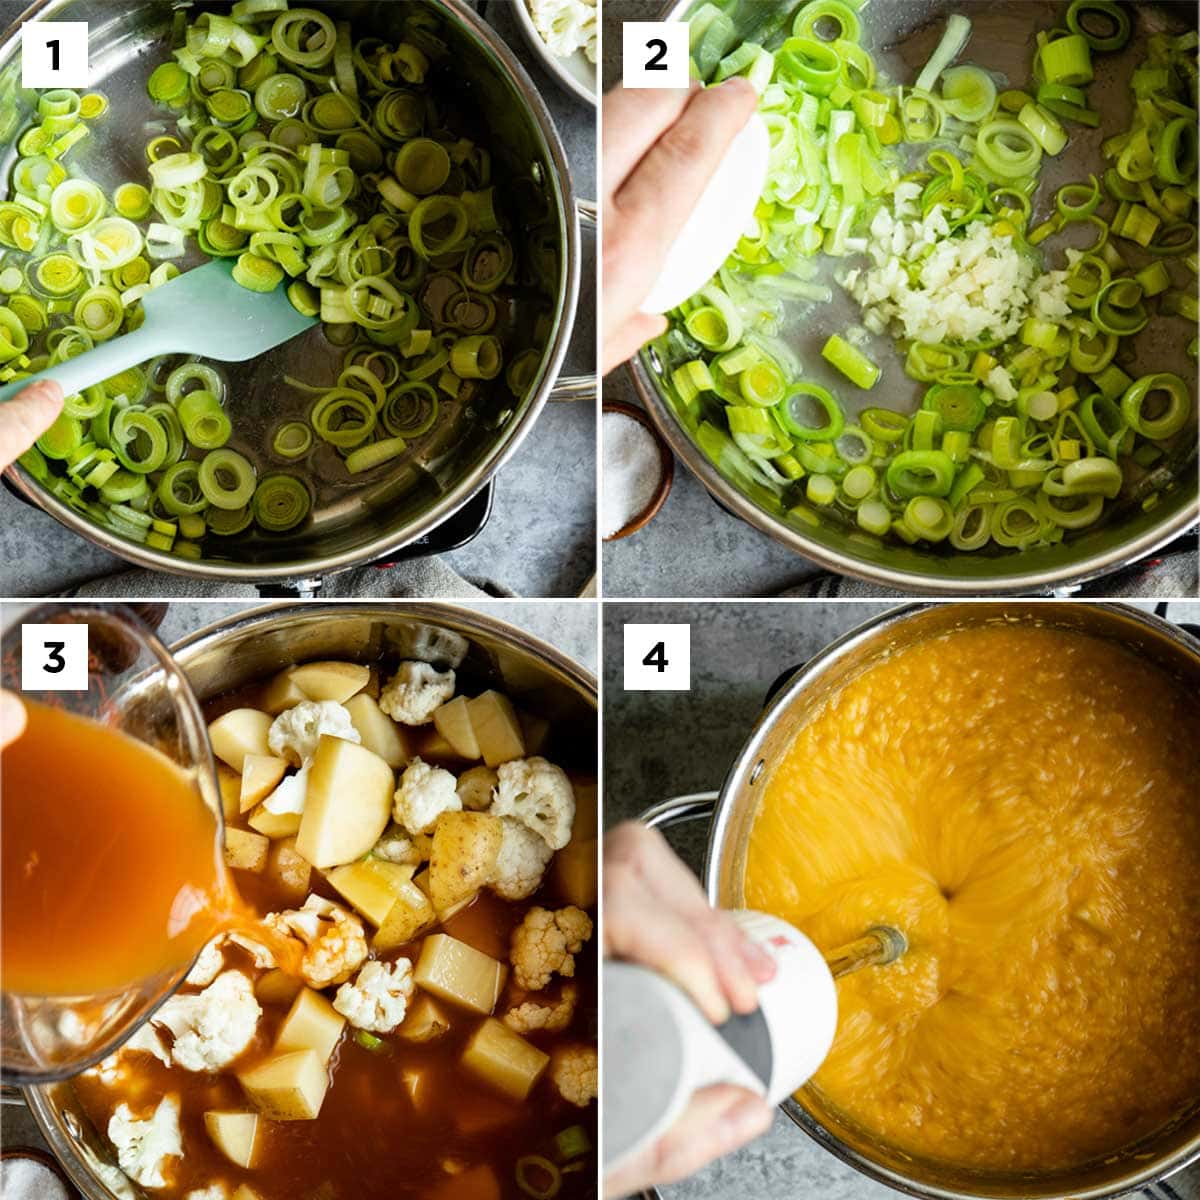 how to make gluten free potato soup: sauté the leek and garlic, then add remaining ingredients and simmer until ready. Finally, use an immersion blender to puree soup.